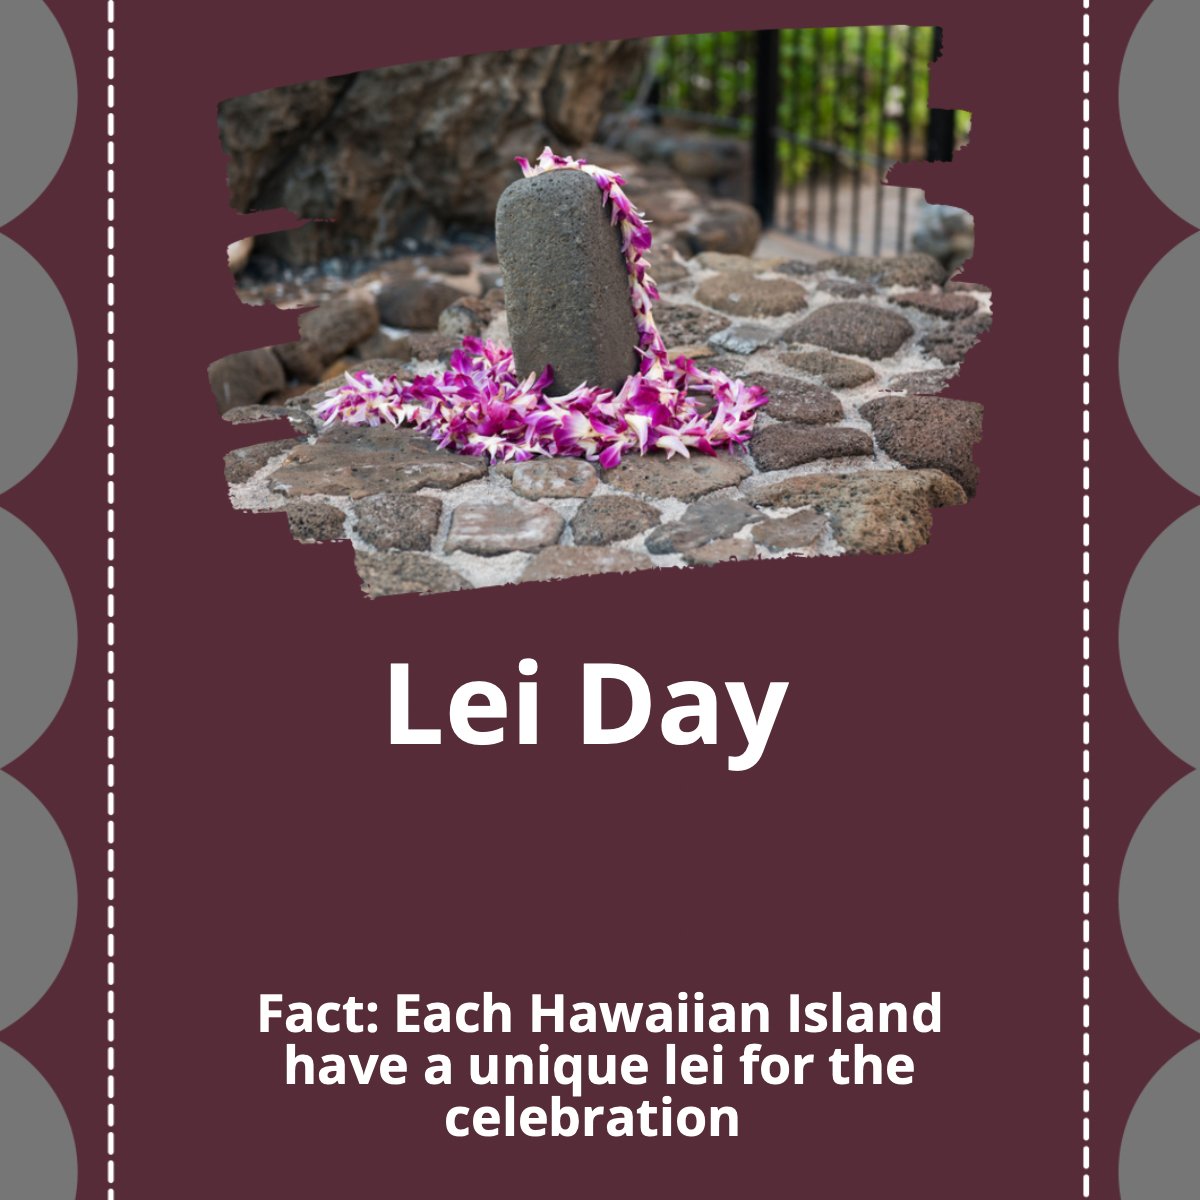 Happy Lei Day to all who celebrate 🙌!

Did you know? 🤔  Each Hawaiian island has a unique lei for the celebration. 😱

#lei #day #hawaii #flowers #celebration #grey
 #BorahRealtySource #Borahsdiditagain #Borahsoldit #bestteamintown #6788737018 #HouseHunting